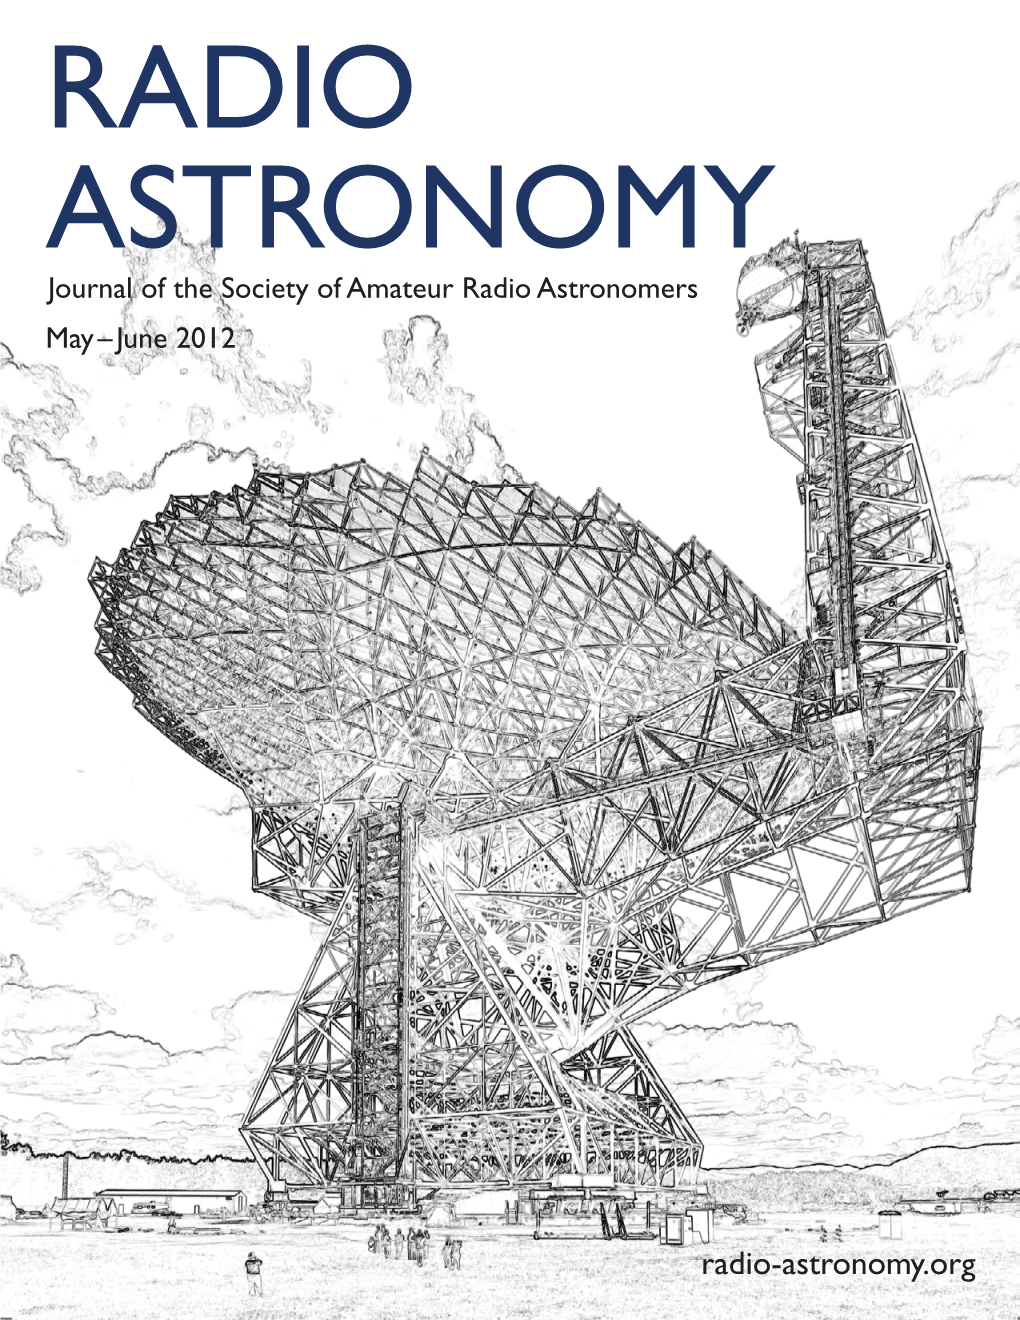 RADIO ASTRONOMY Journal of the Society of Amateur Radio Astronomers May – June 2012